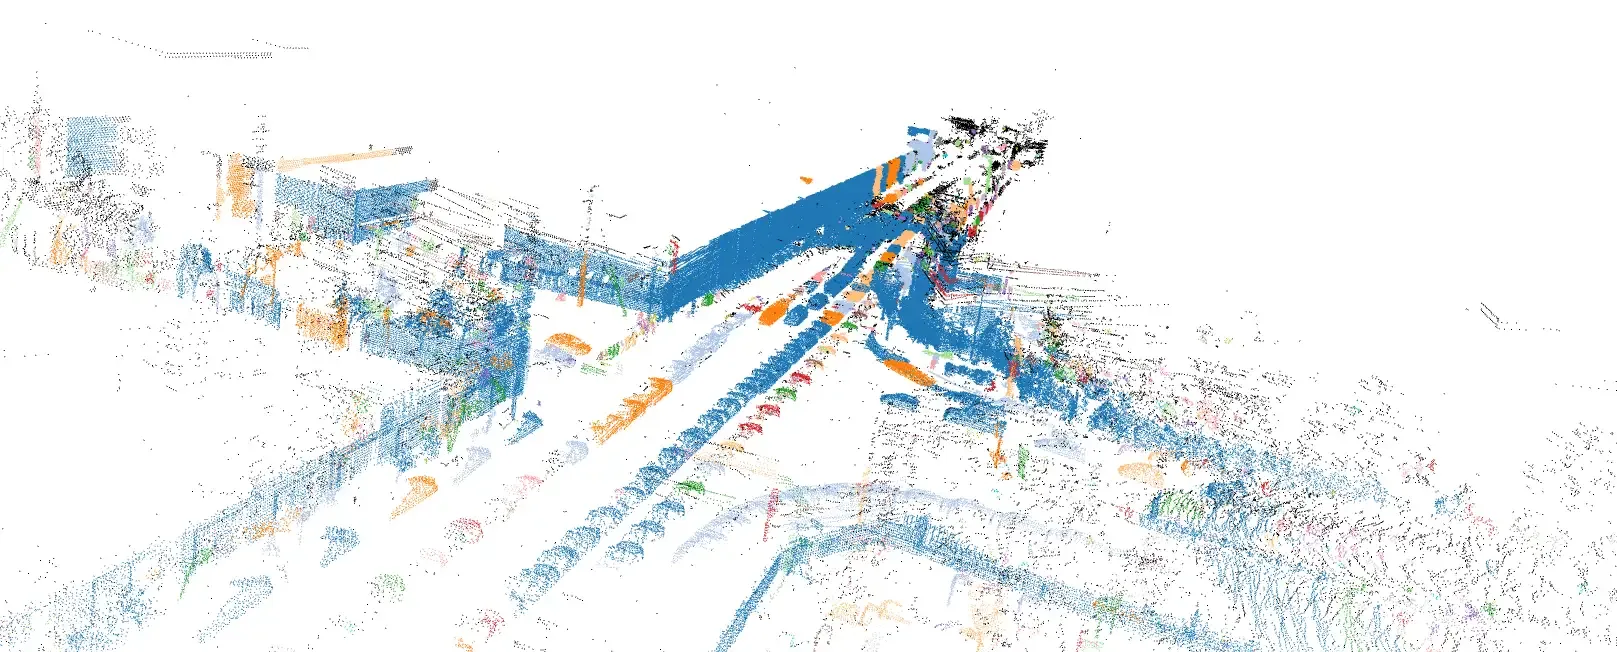 LiDAR point cloud of Brannan Street, San Francisco, after 3D clustering of obstacles